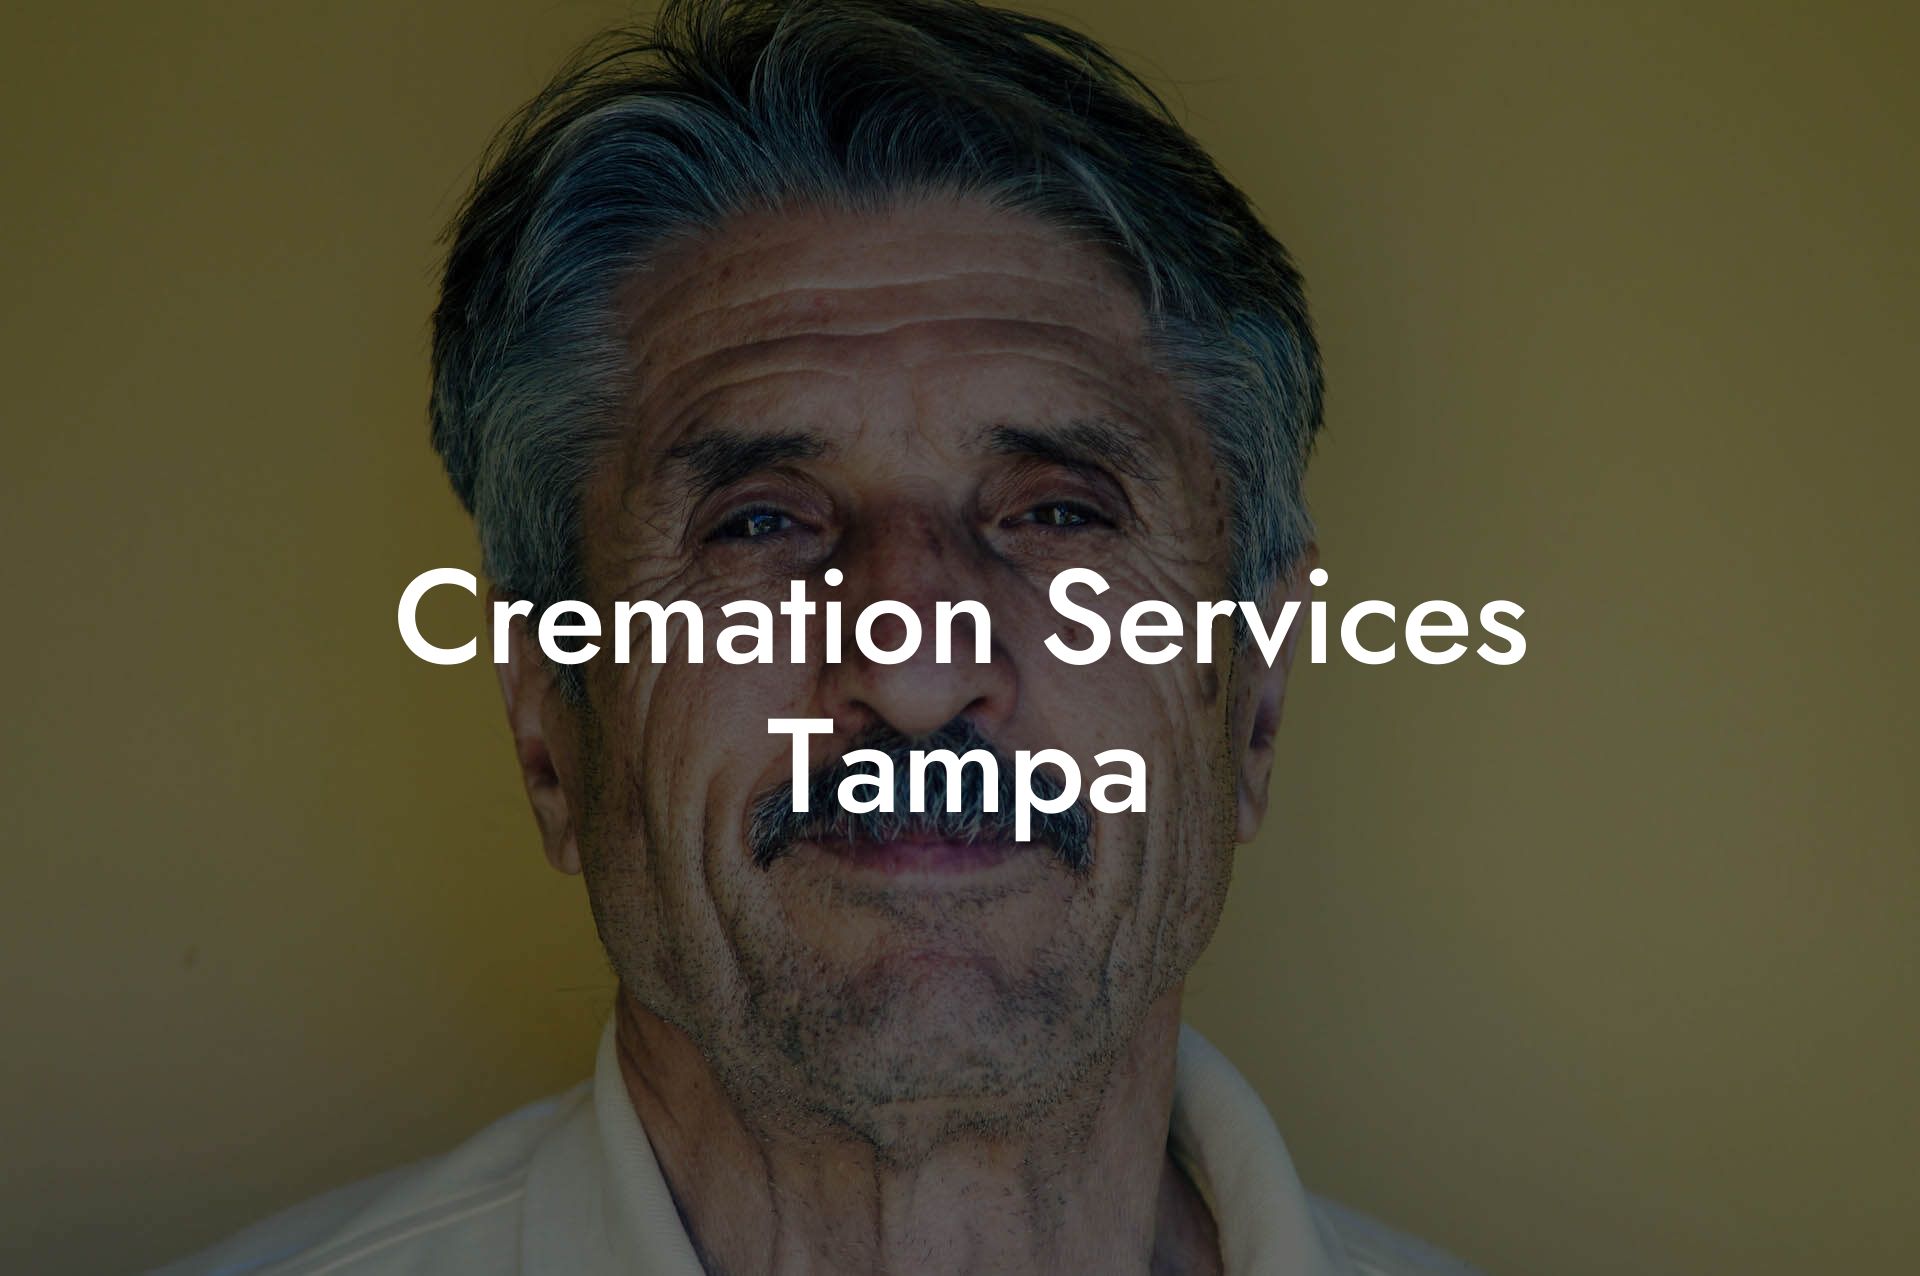 Cremation Services Tampa